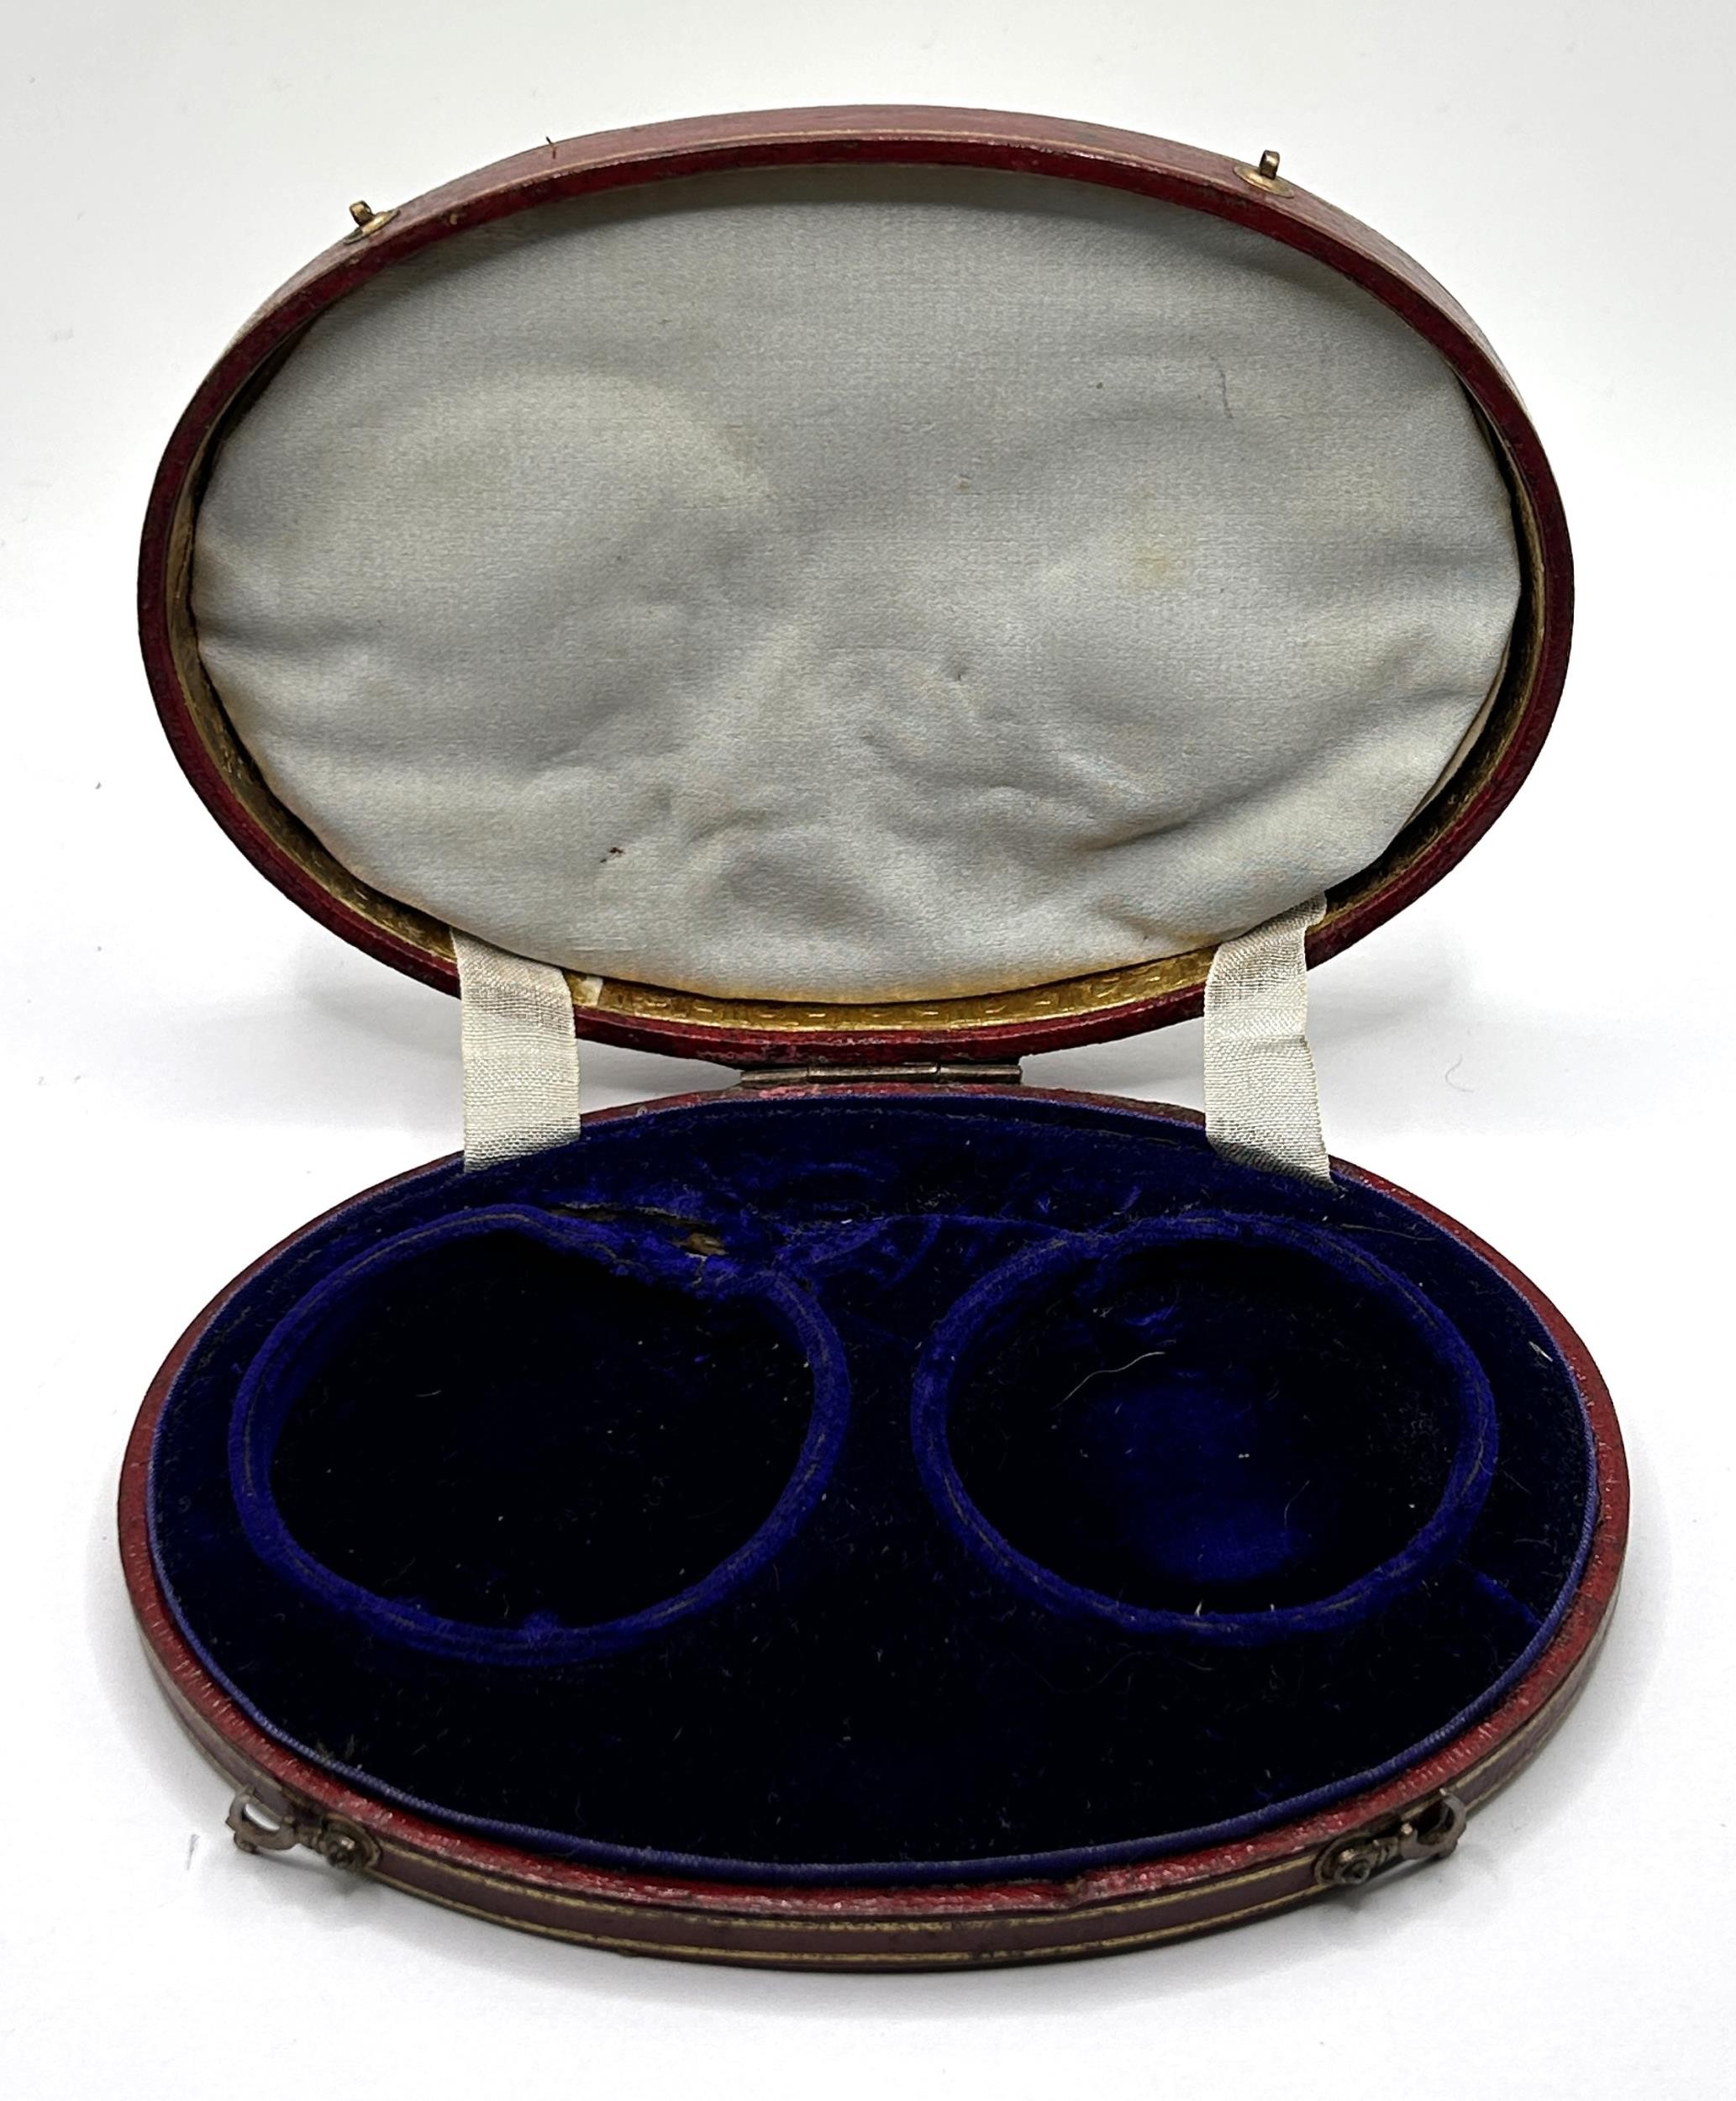 An early/mid 19th century French oval box, to hold two pocket watches, the cover tooled in gilt 'DON - Image 3 of 5